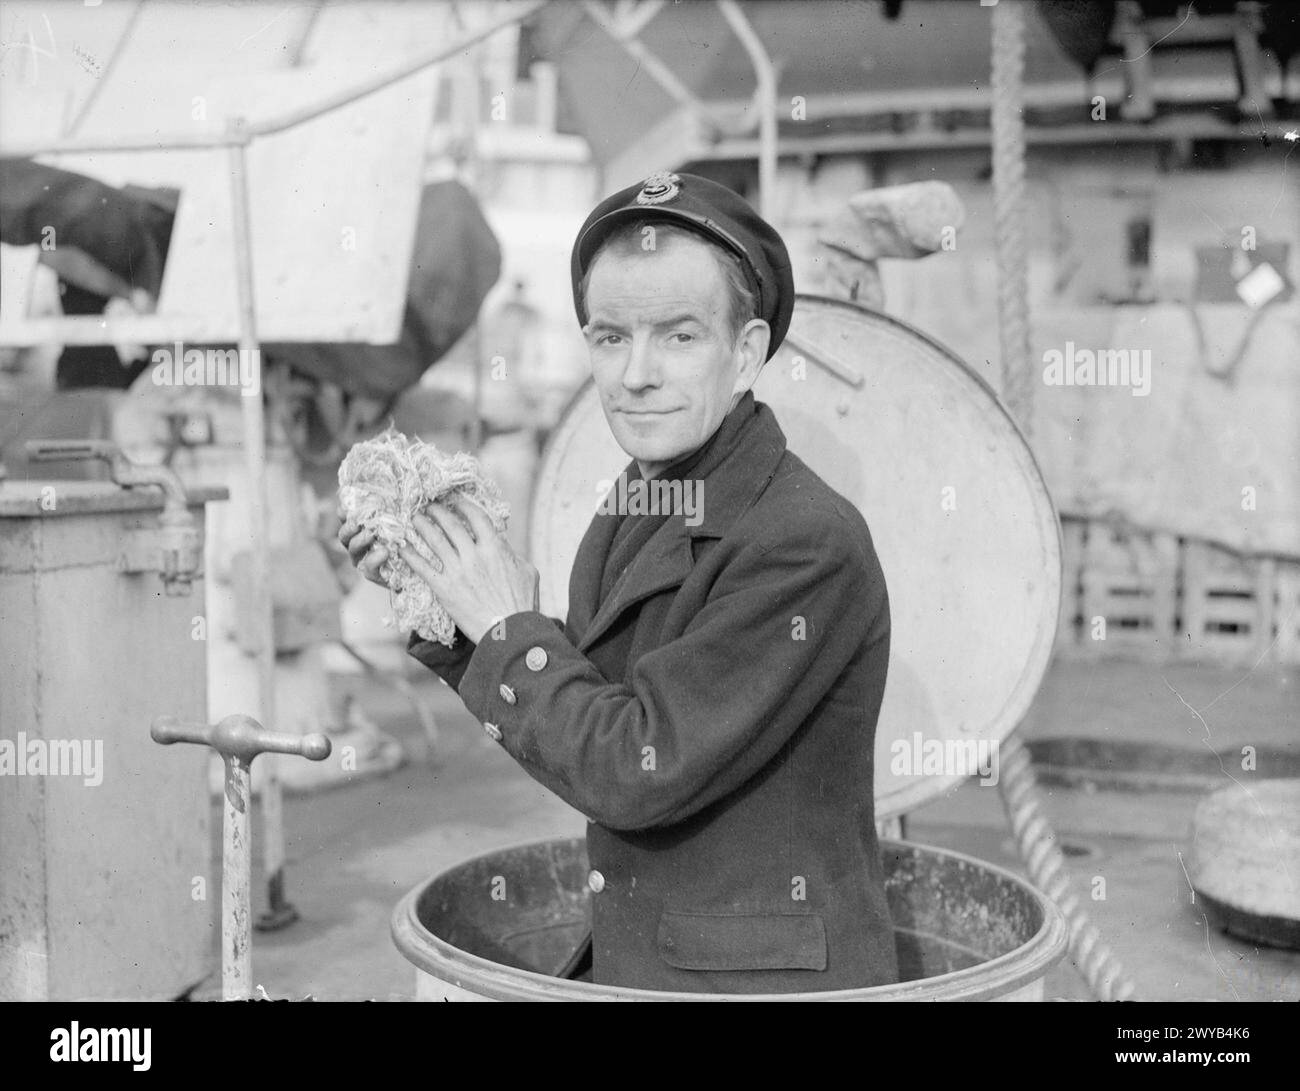 GLASGOW MAN WITH HMS BULLDOG. 11 NOVEMBER 1943, PORTSMOUTH. - Engine room Artificer James Robb, from Glasgow, member of the crew of HMS BULLDOG, a Beagle Class destroyer. , Stock Photo